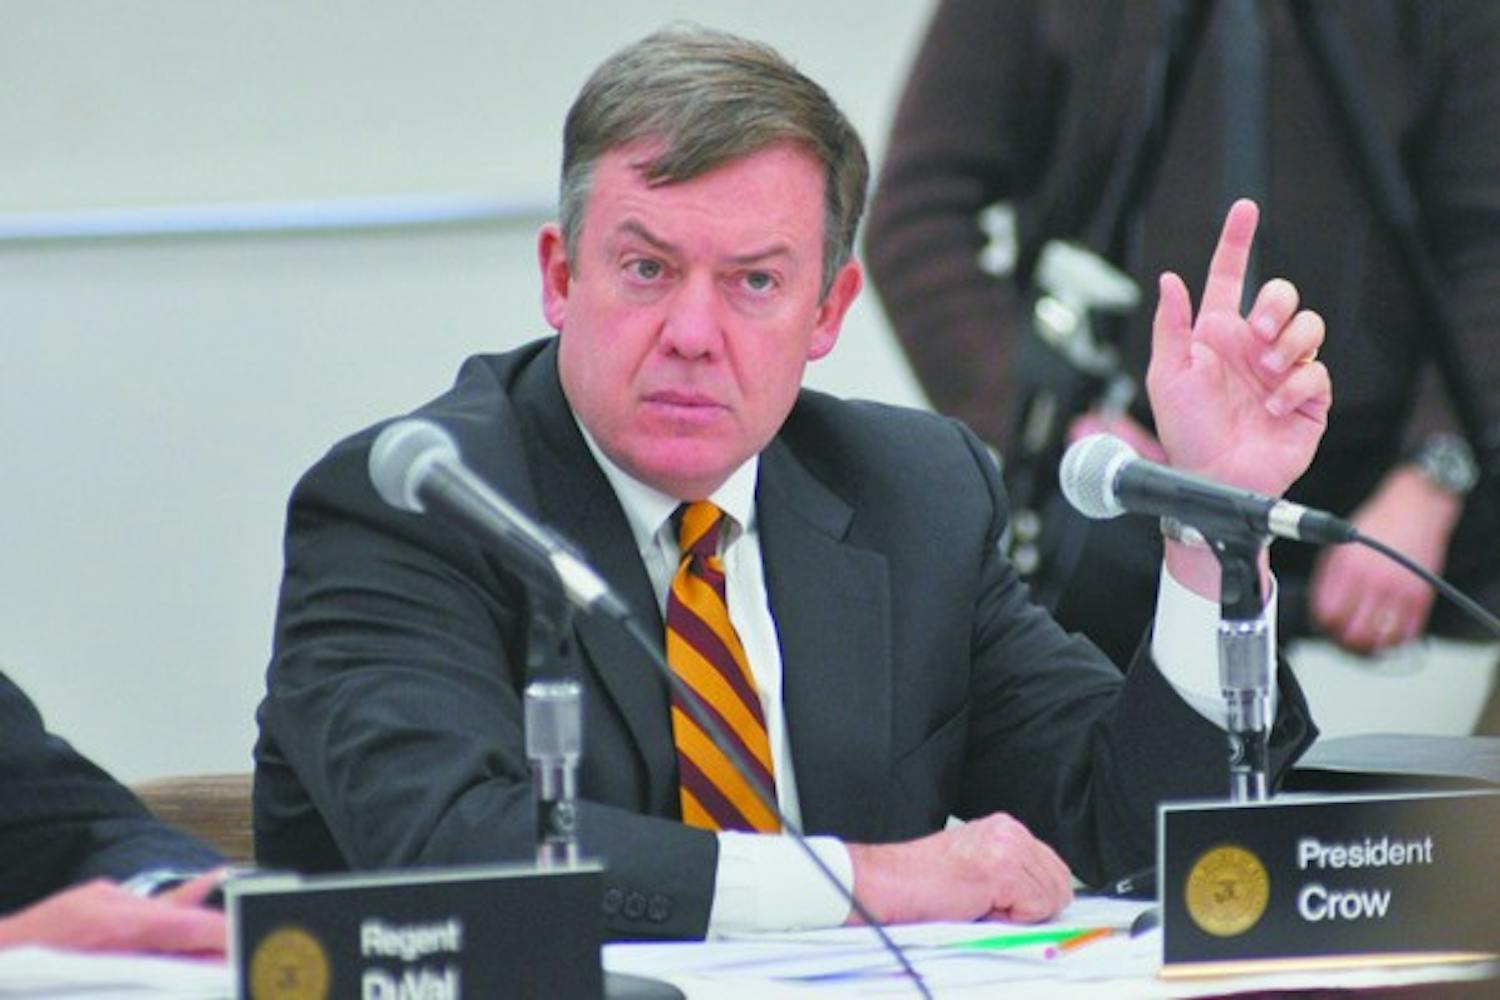 REGENTS ON CAMPUS: ASU President Michael Crow speaks at the Arizona Board of Regents meeting that took place at the Memorial Union on Thursday and Friday. The meeting covered a wide range of issues, from concealed weapons on campus to changes in tuition.  (Photo by Sierra Smith)